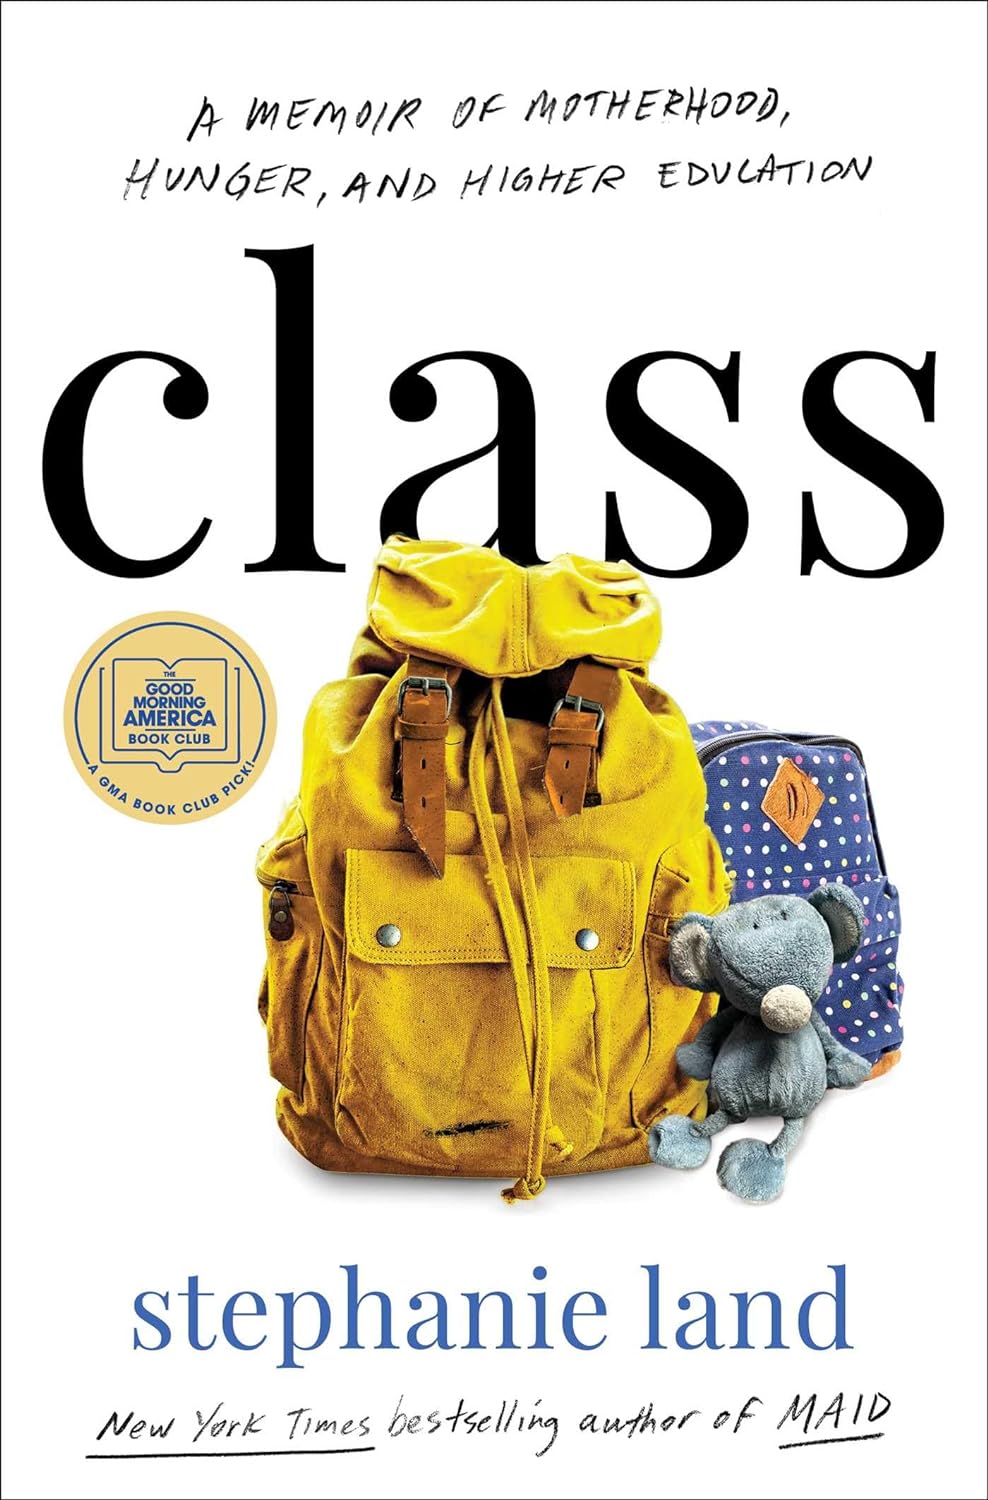 Image for "Class"